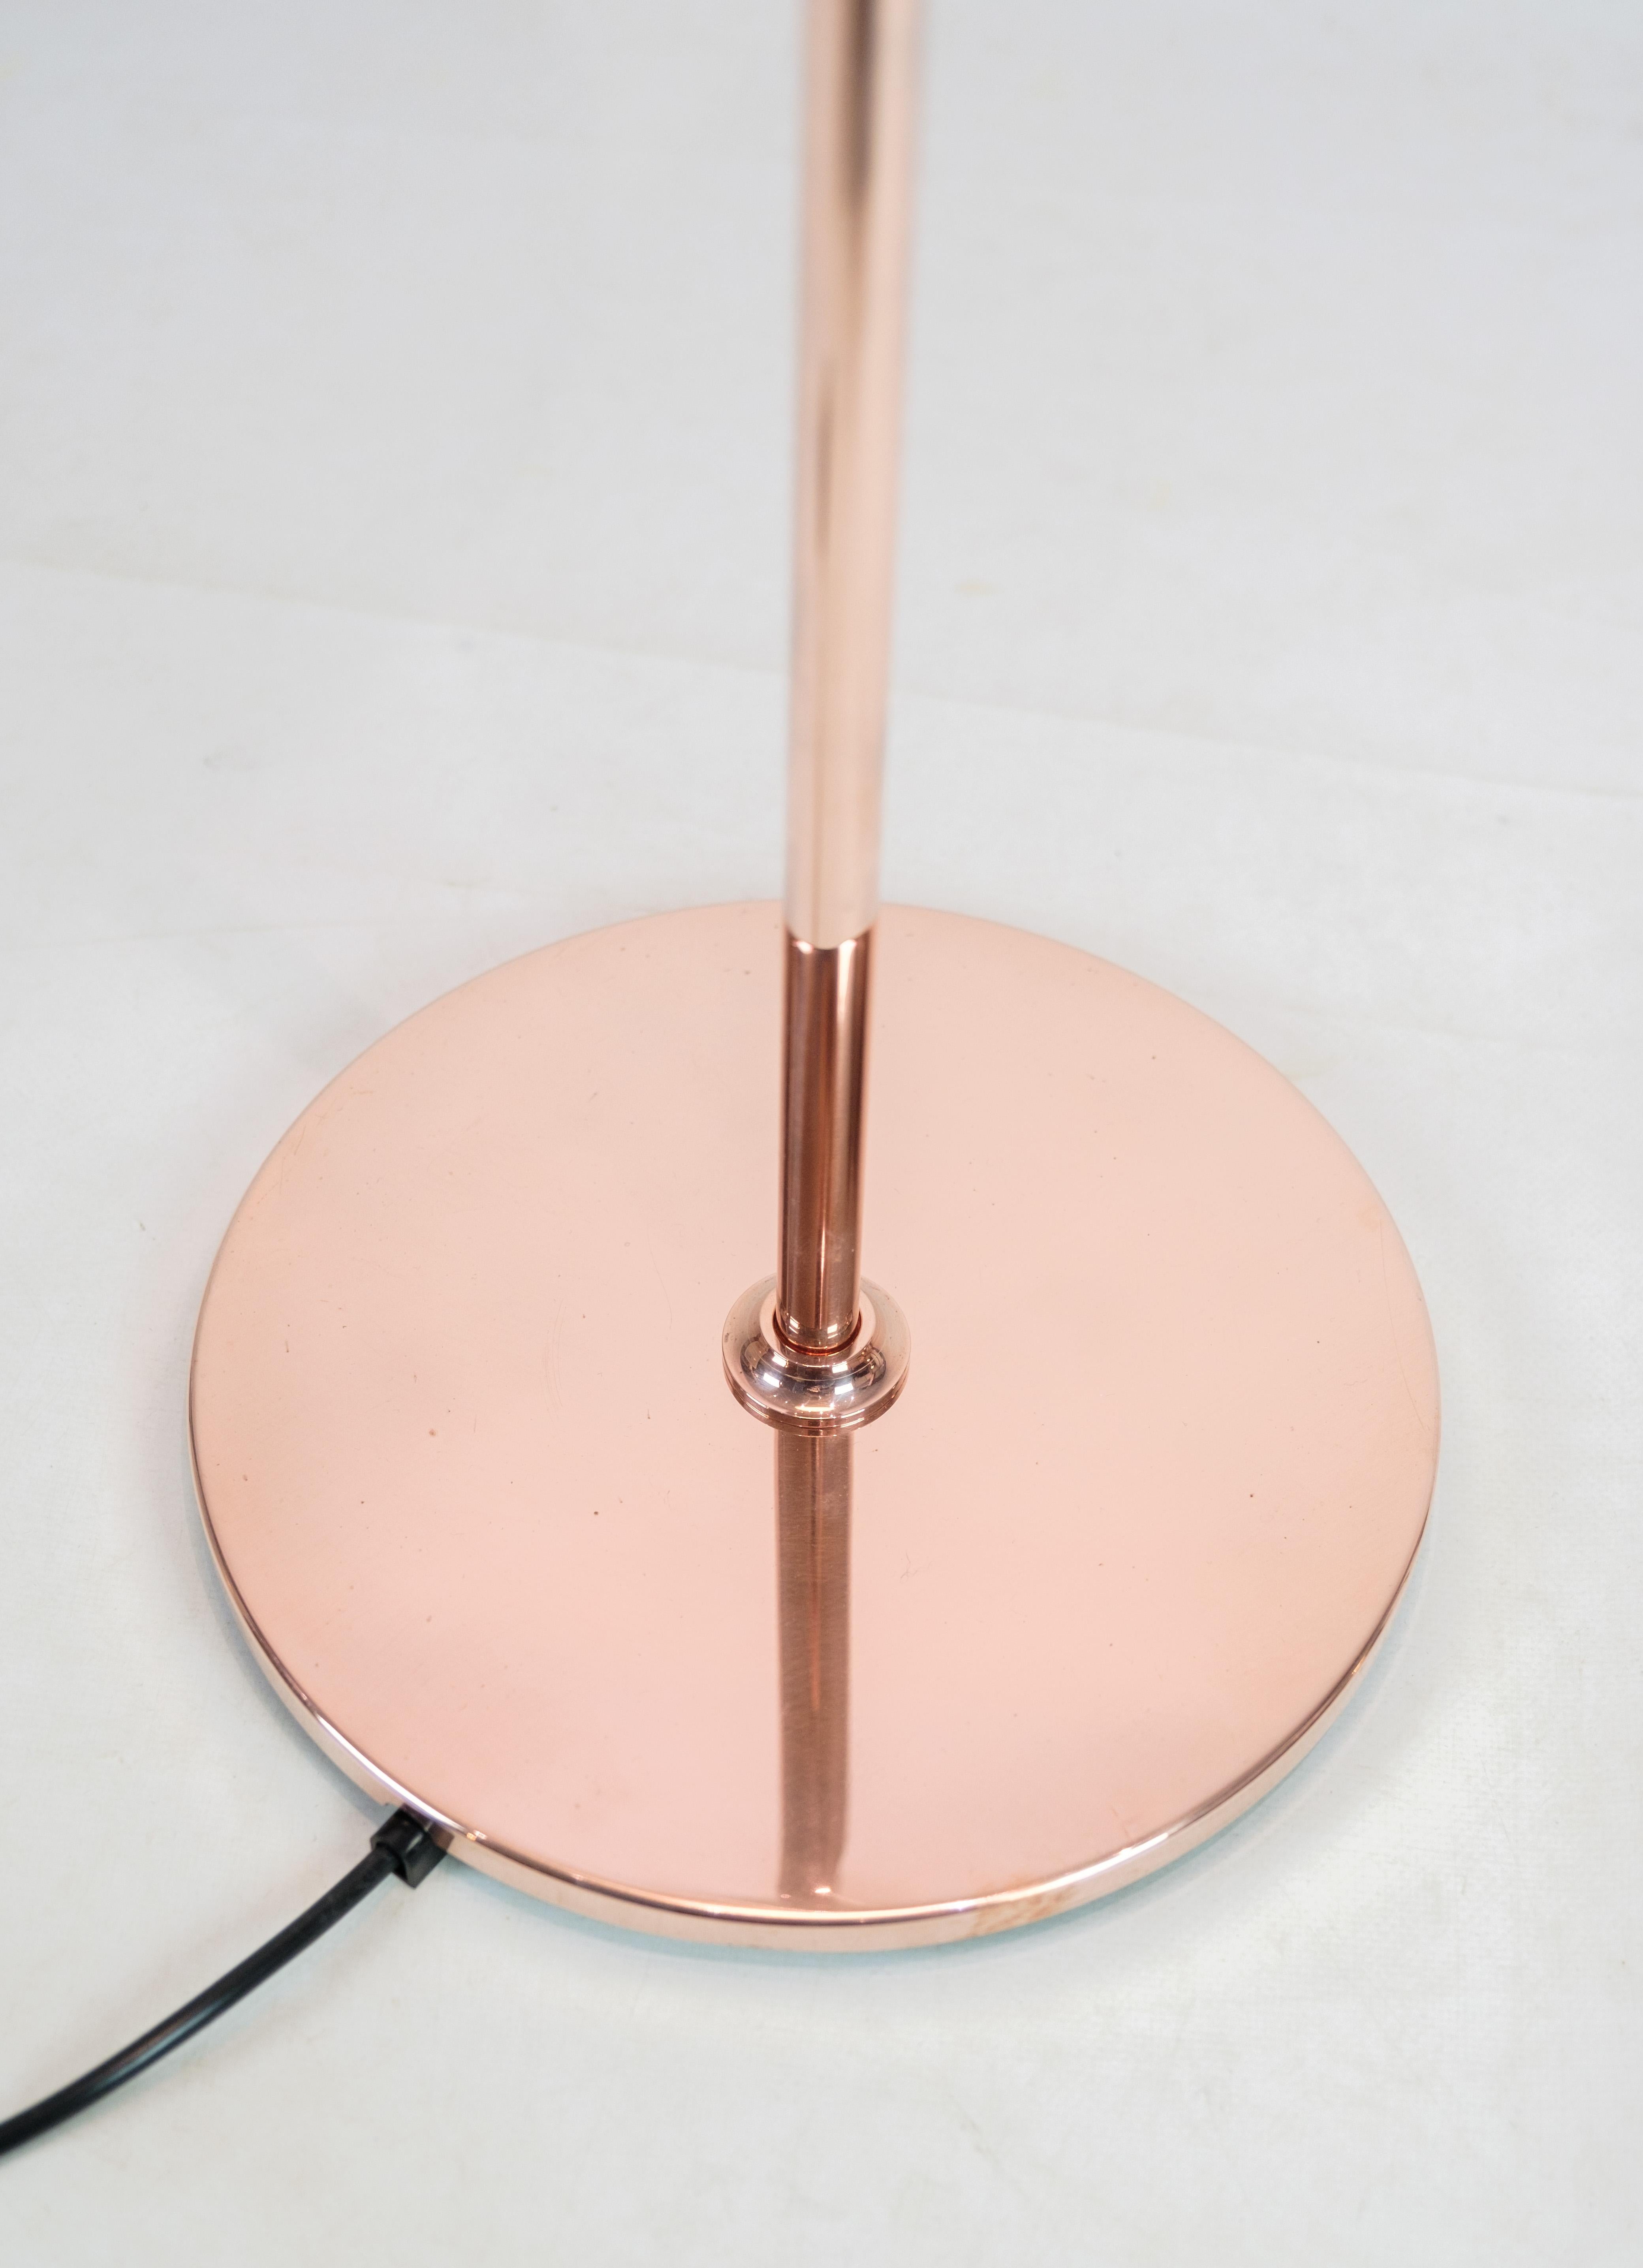 PH floor lamp, model PH3½-2½, limited edition in copper designed by Poul Henningsen and produced by Louis Poulsen. The lamp has an upper shade of copper and two lower shades of white opal glass. The lamp was only sold between 1 October and 31